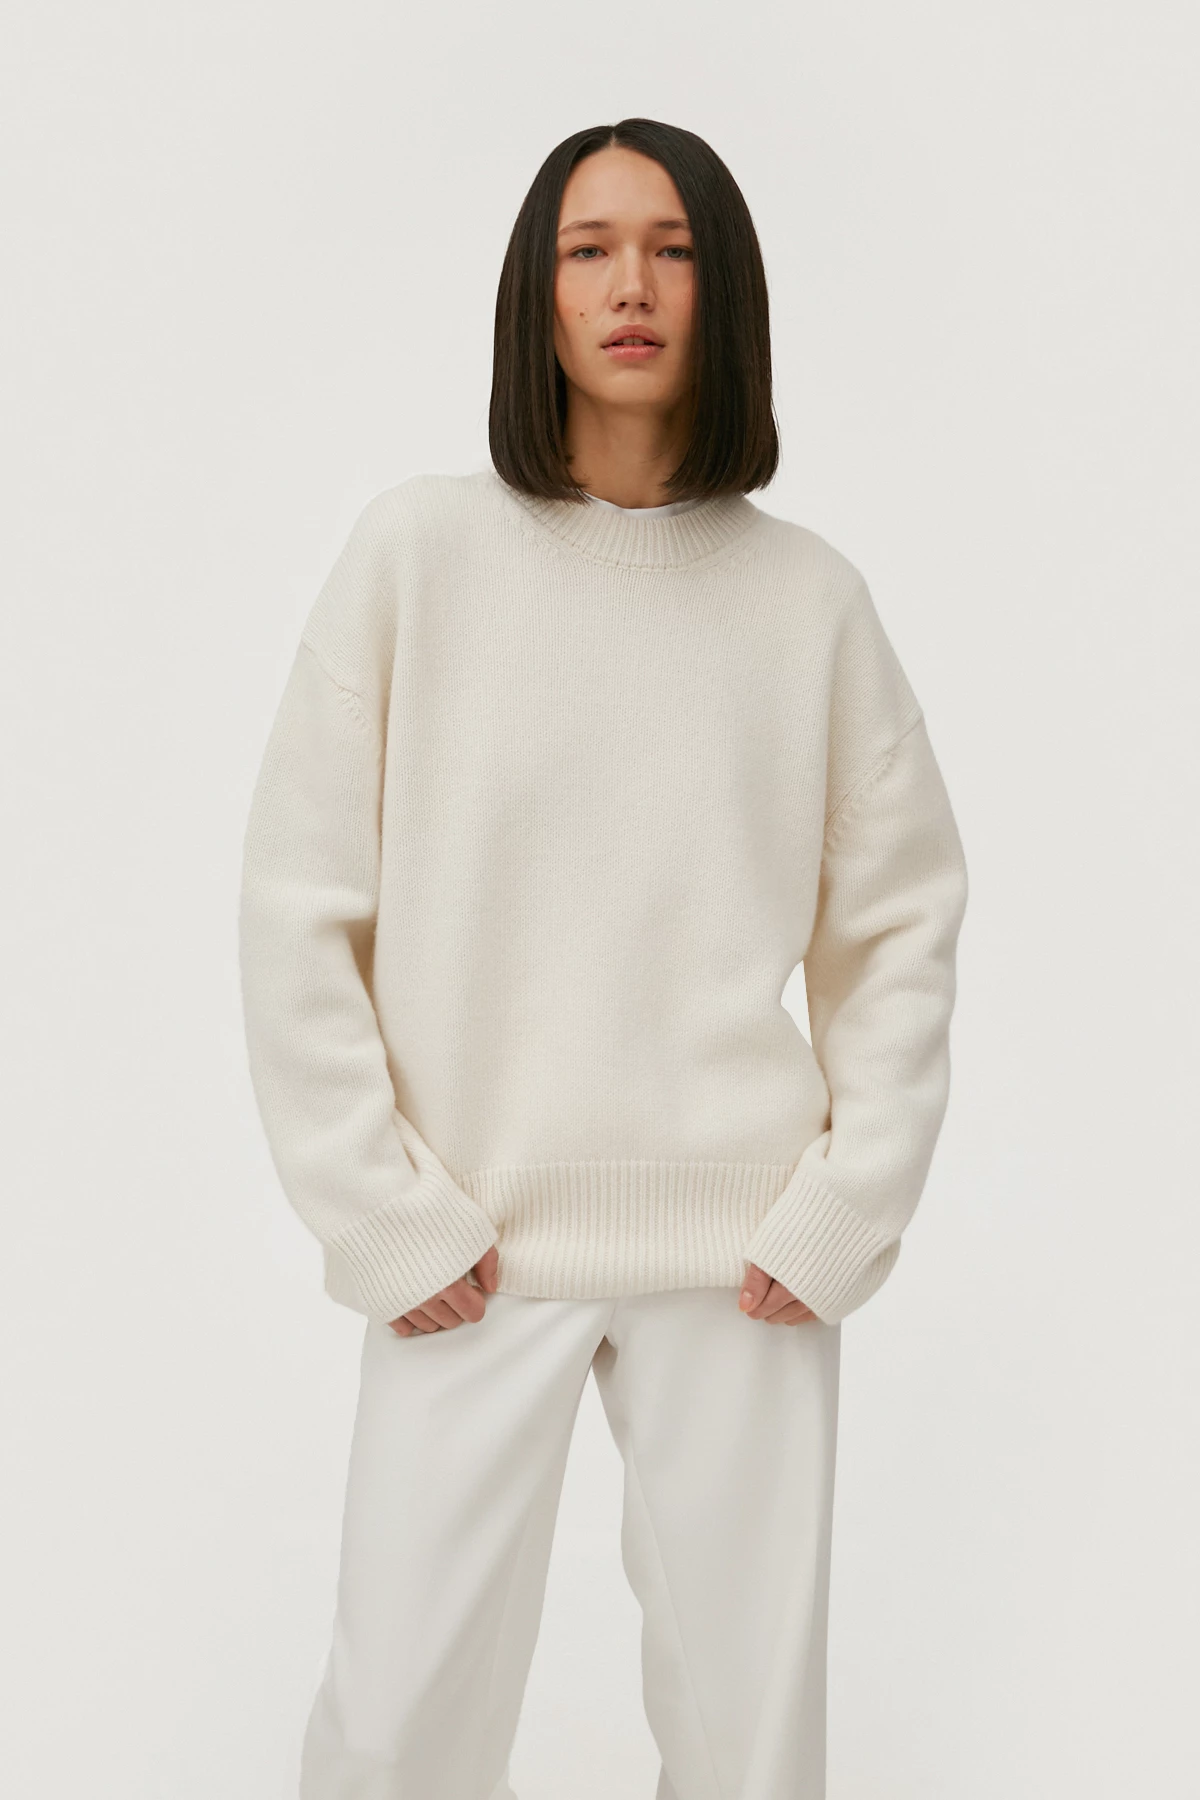 Cashmere milky loose-fit sweater, photo 1